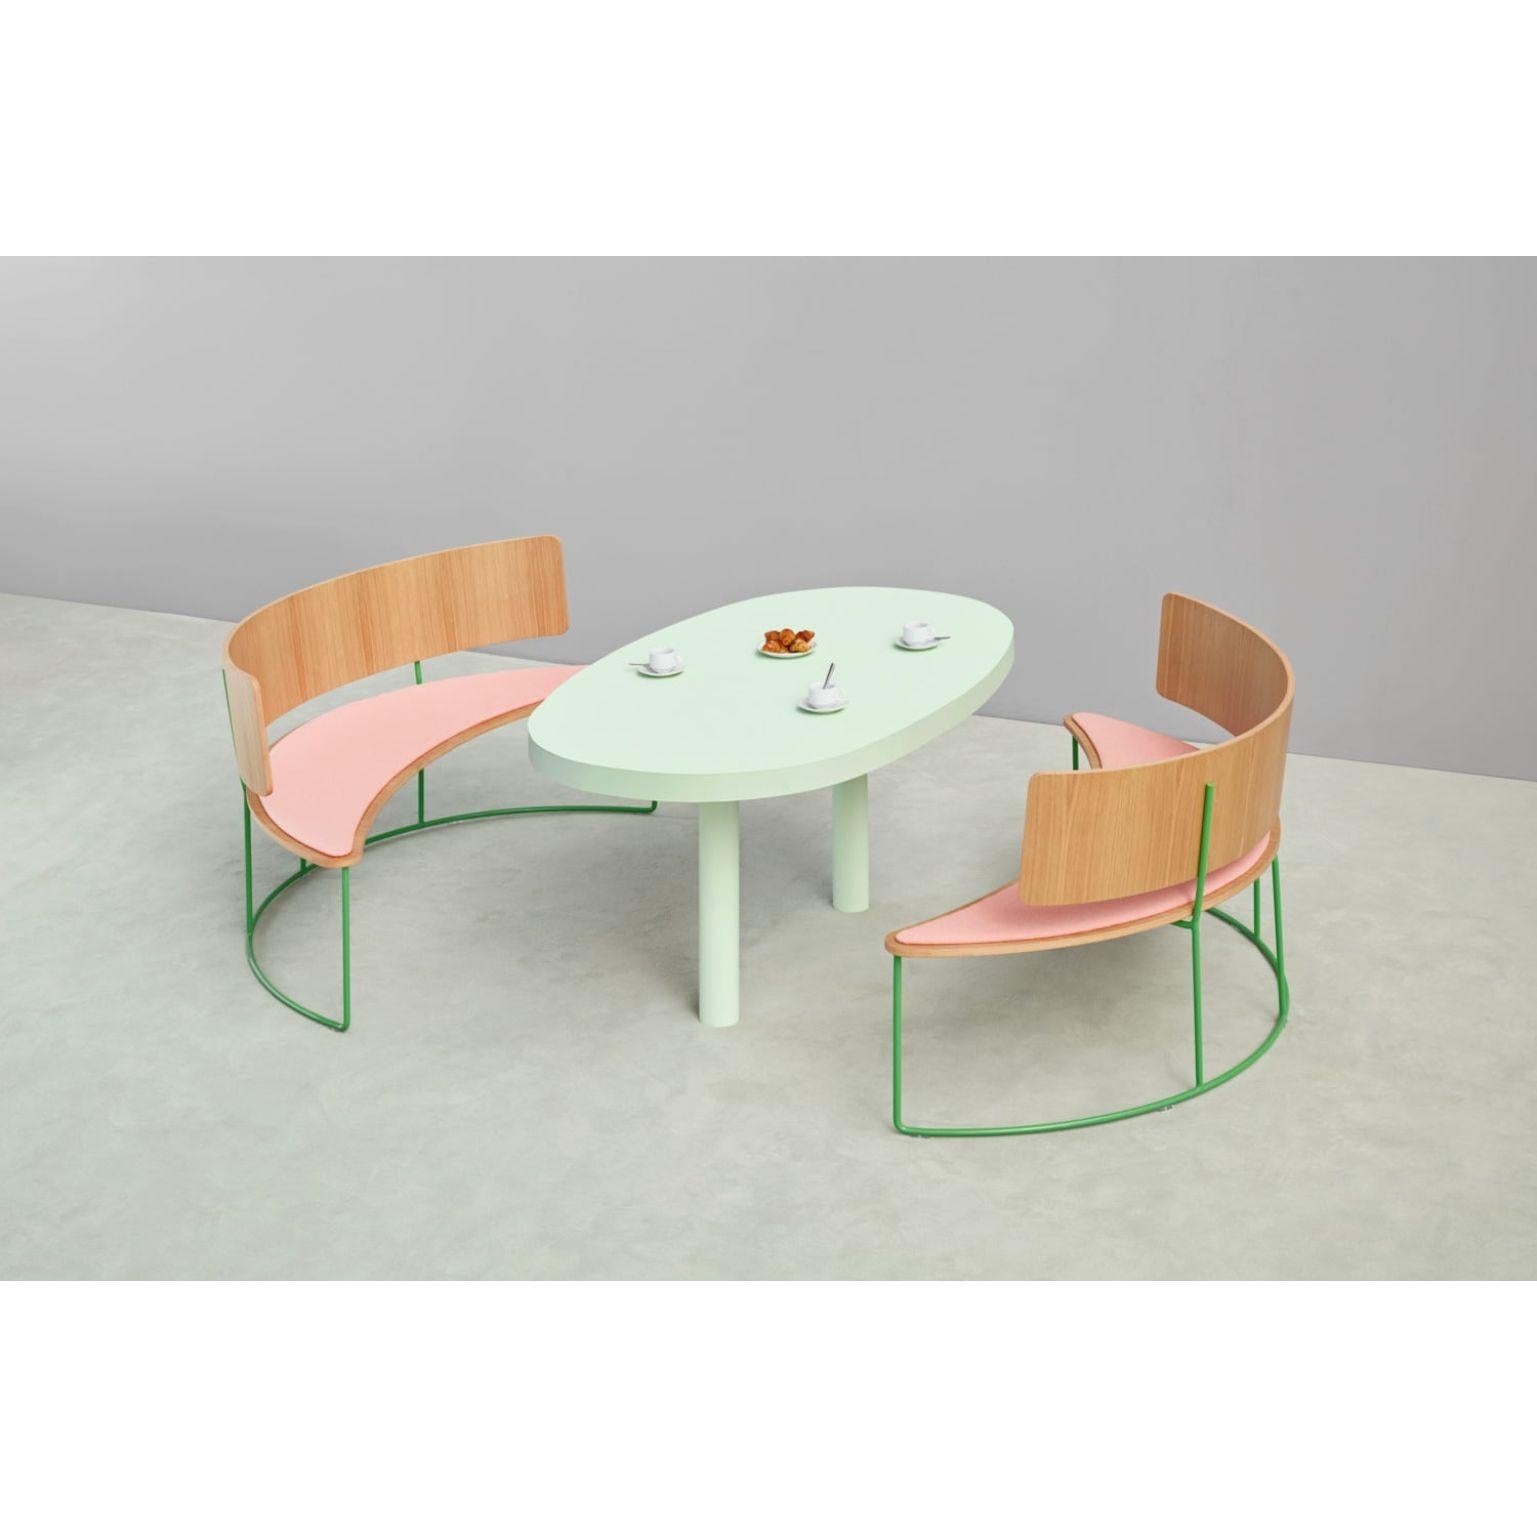 A set of 2 boomerang benches - Pink by Cardeoli 
Dimensions: W152, D72, H79, Seat 43
Materials: Paint coated iron structure / gold / copper or chromed iron structure
Plywood backrest and seat covered with a natural oak wood layer
Upholstered